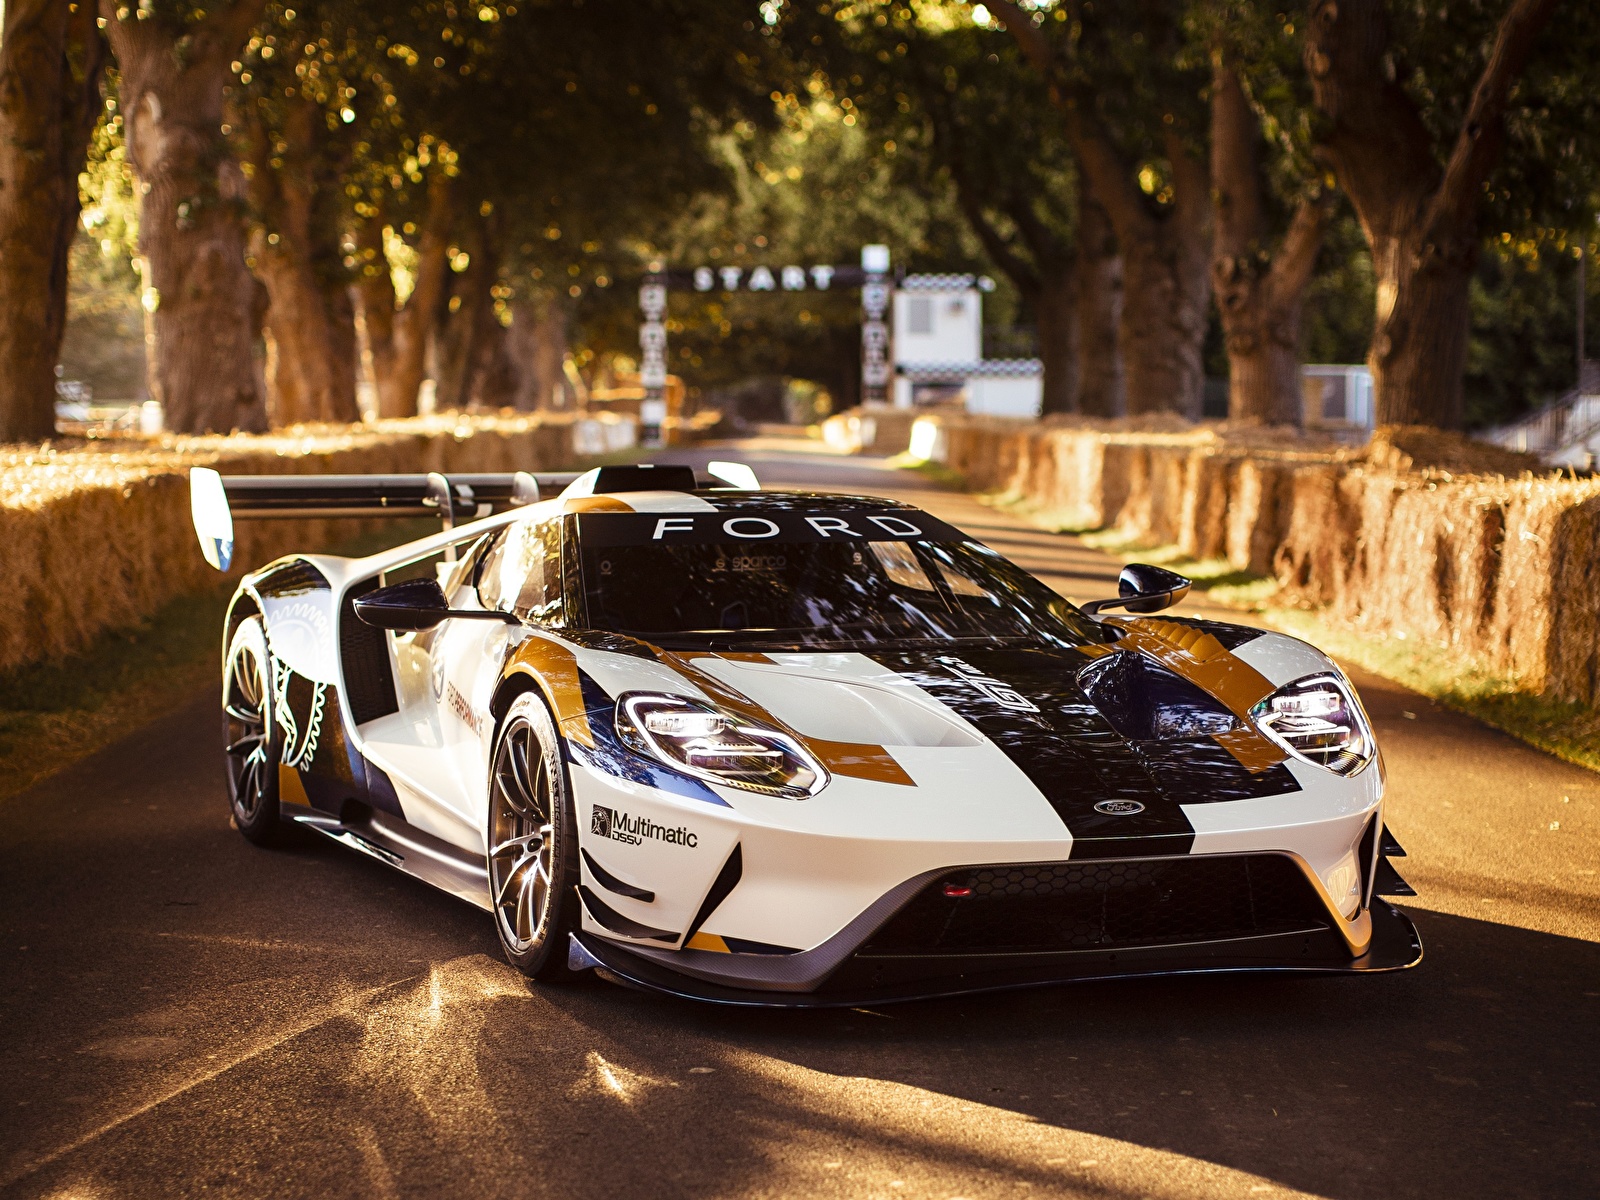 Desktop Wallpapers Ford Tuning GT Mk II automobile 1600x1200 Cars auto